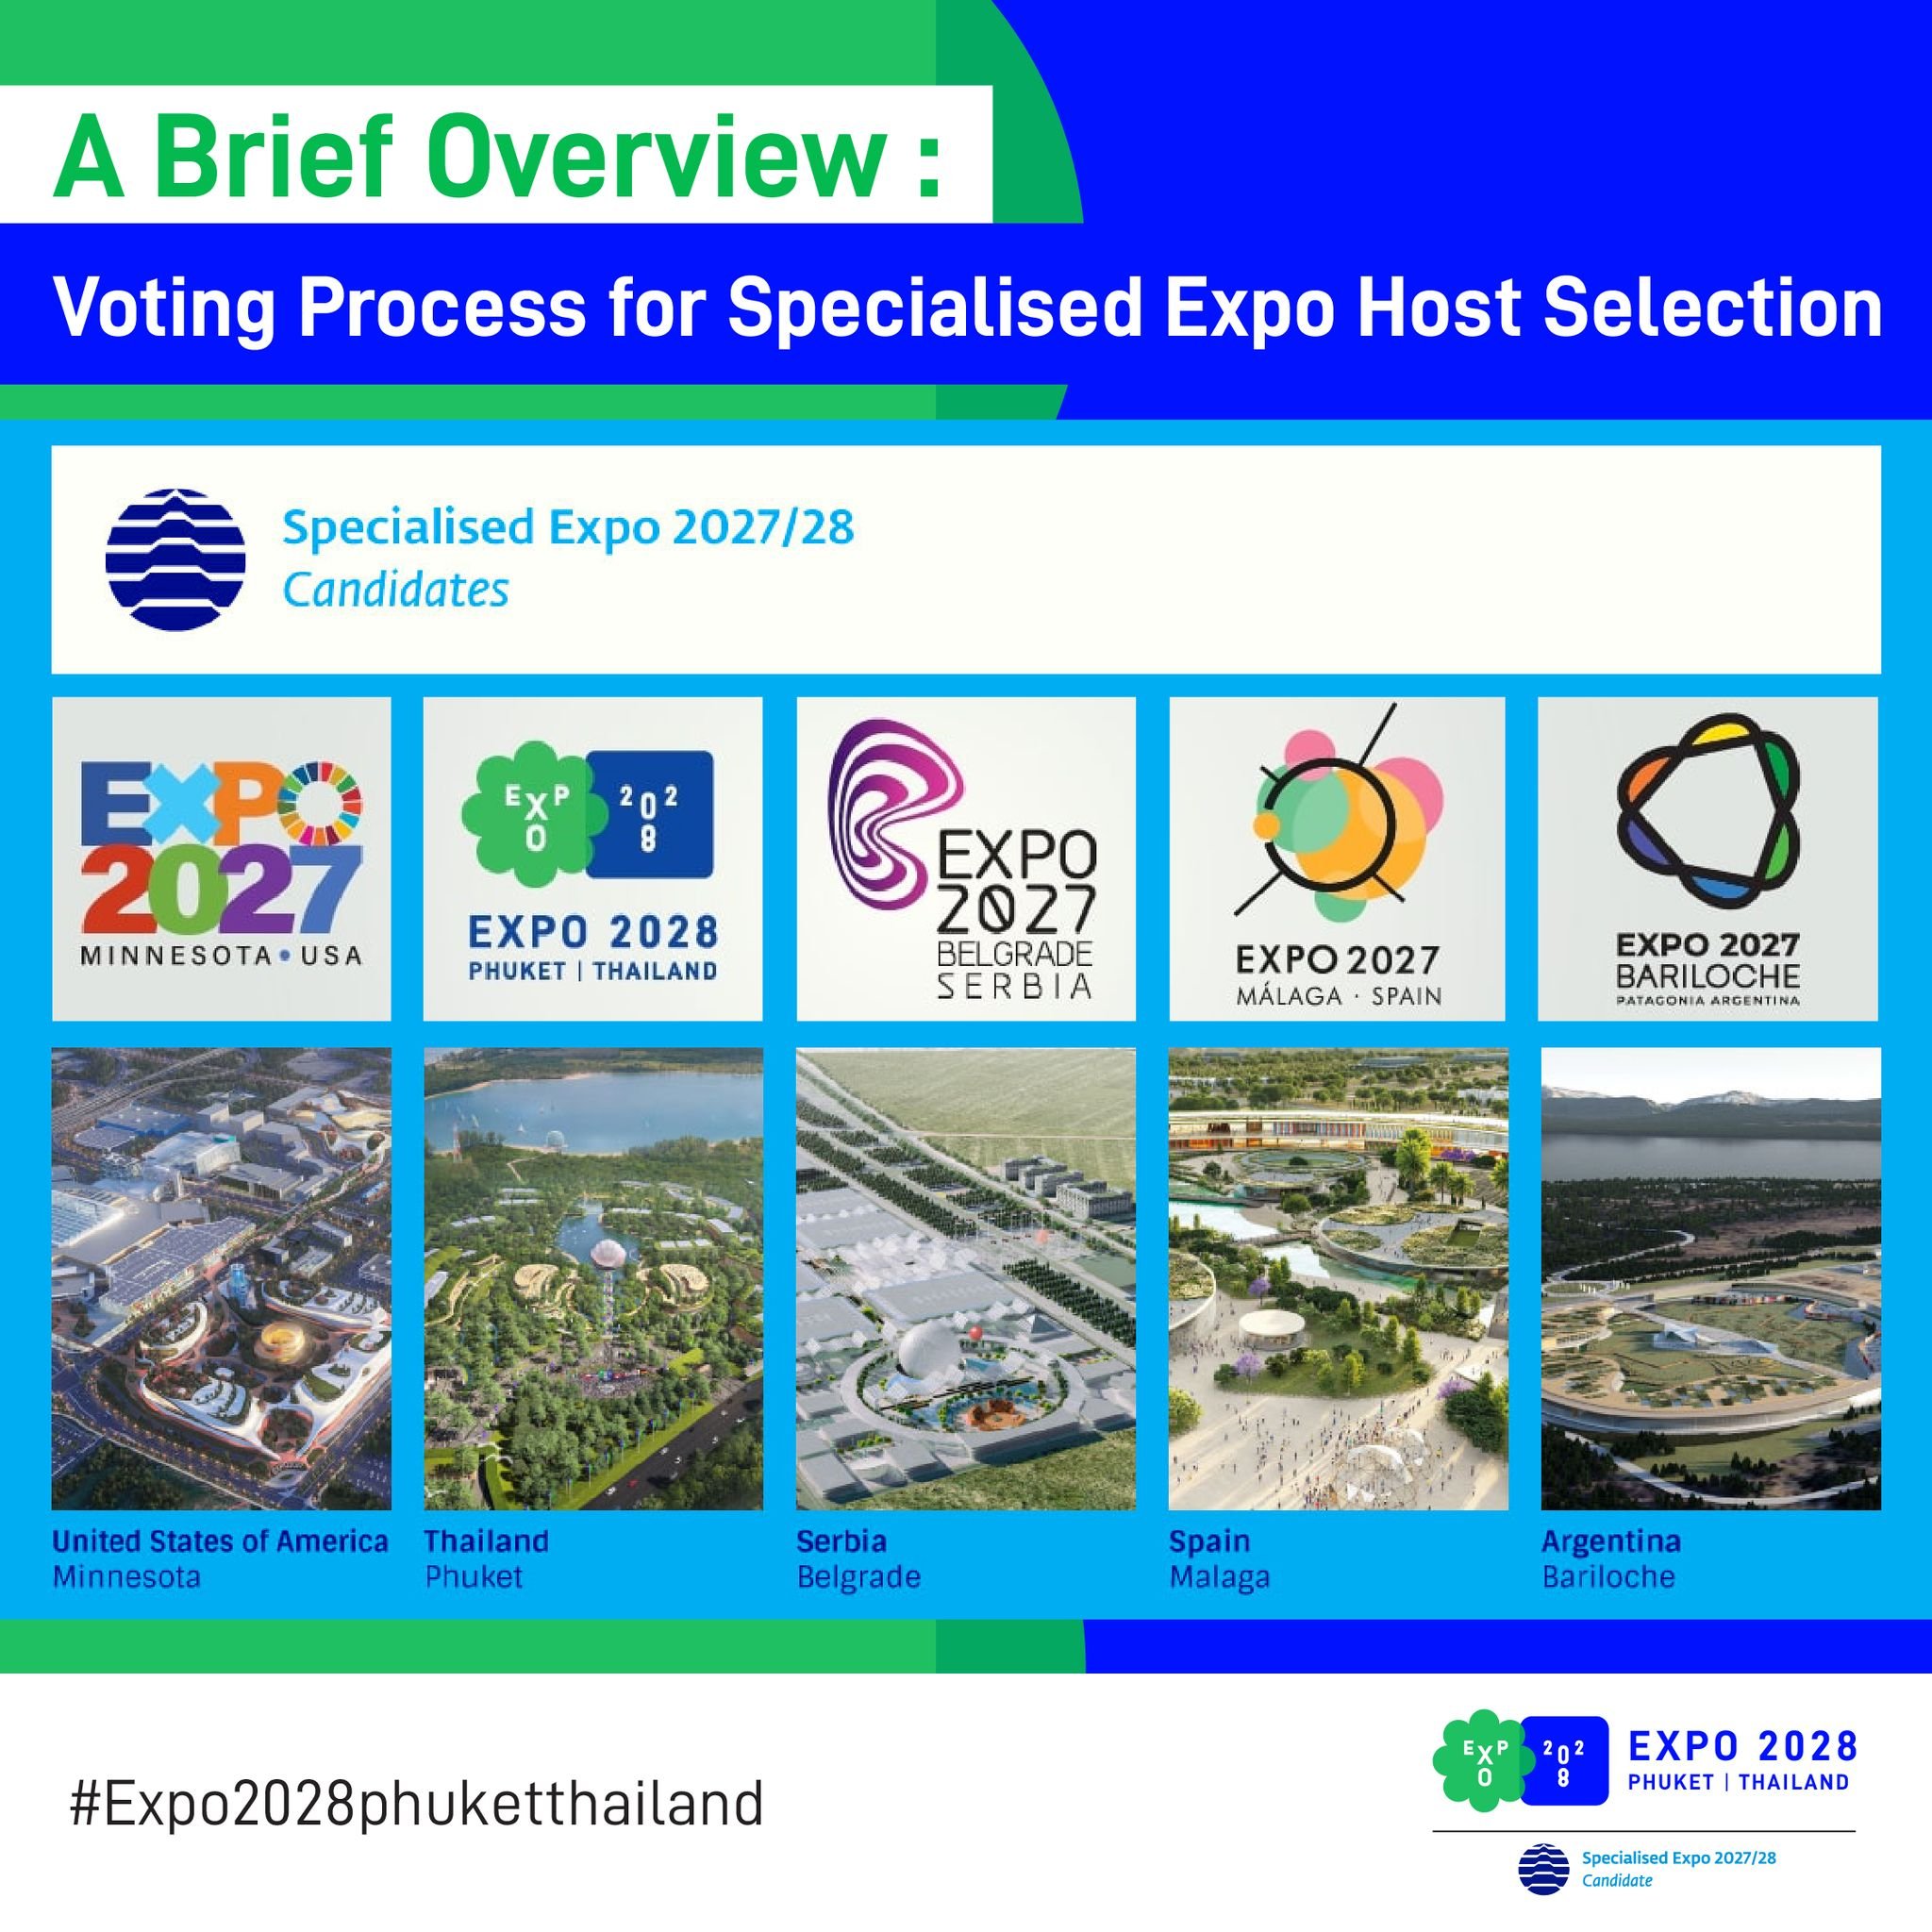 Specialised Expo